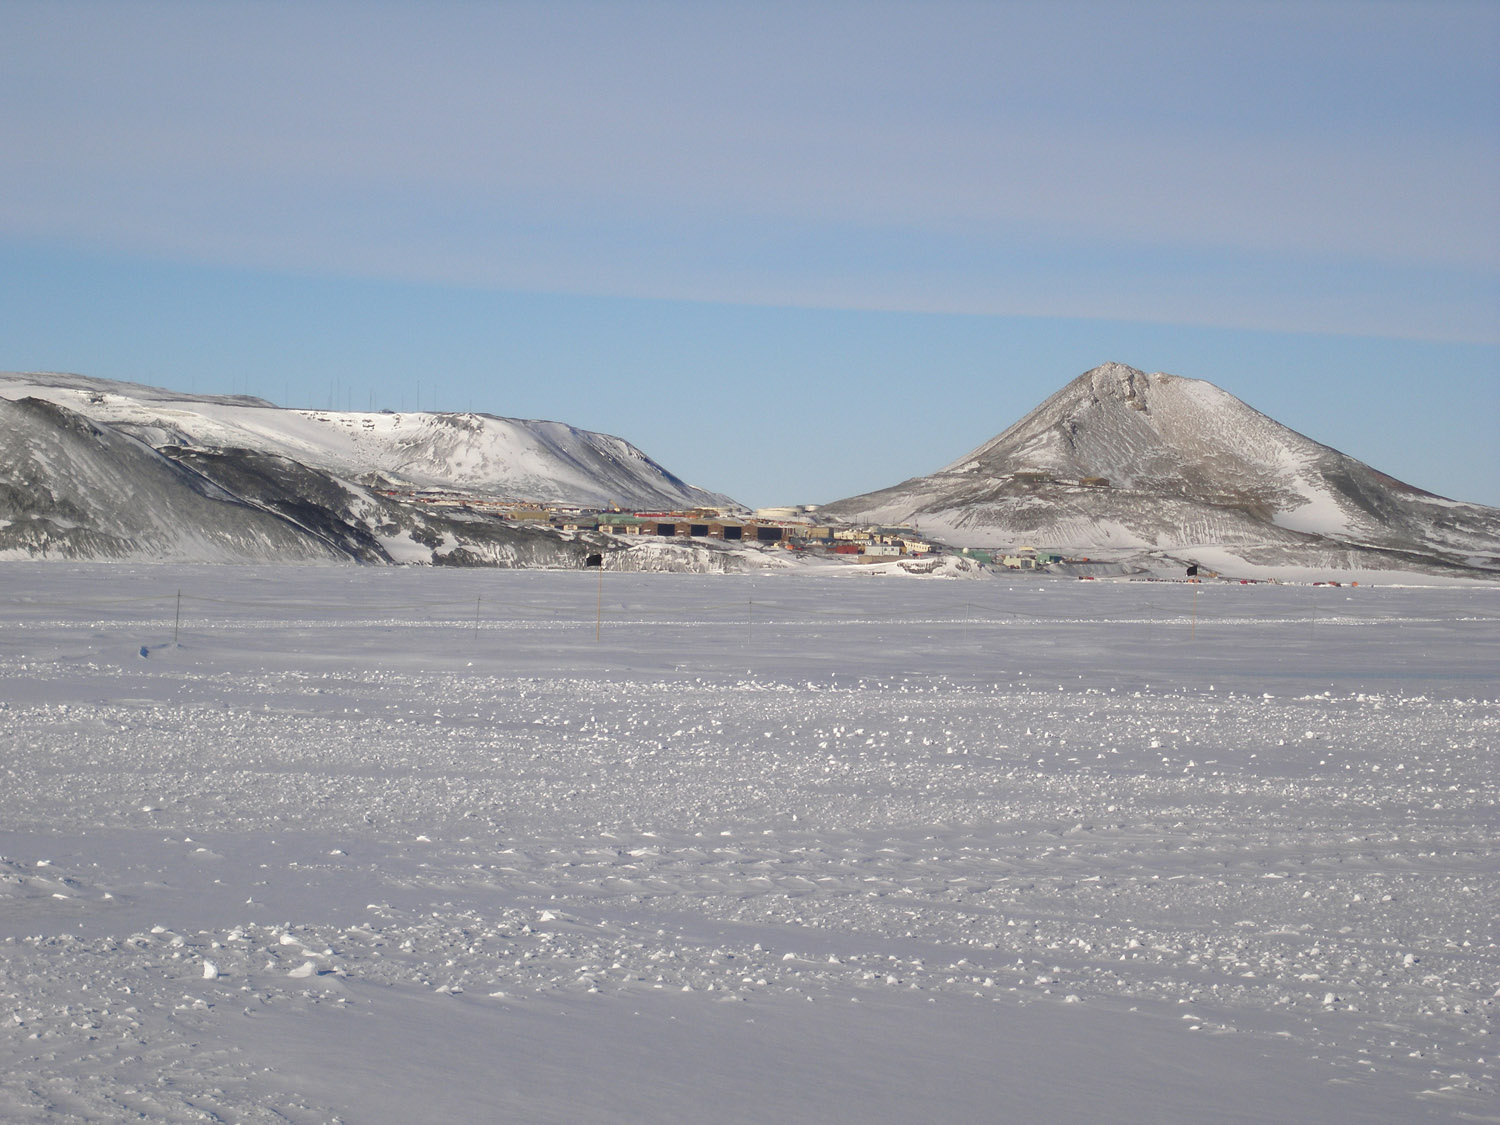 McMurdo Station - seen from the sea ice.